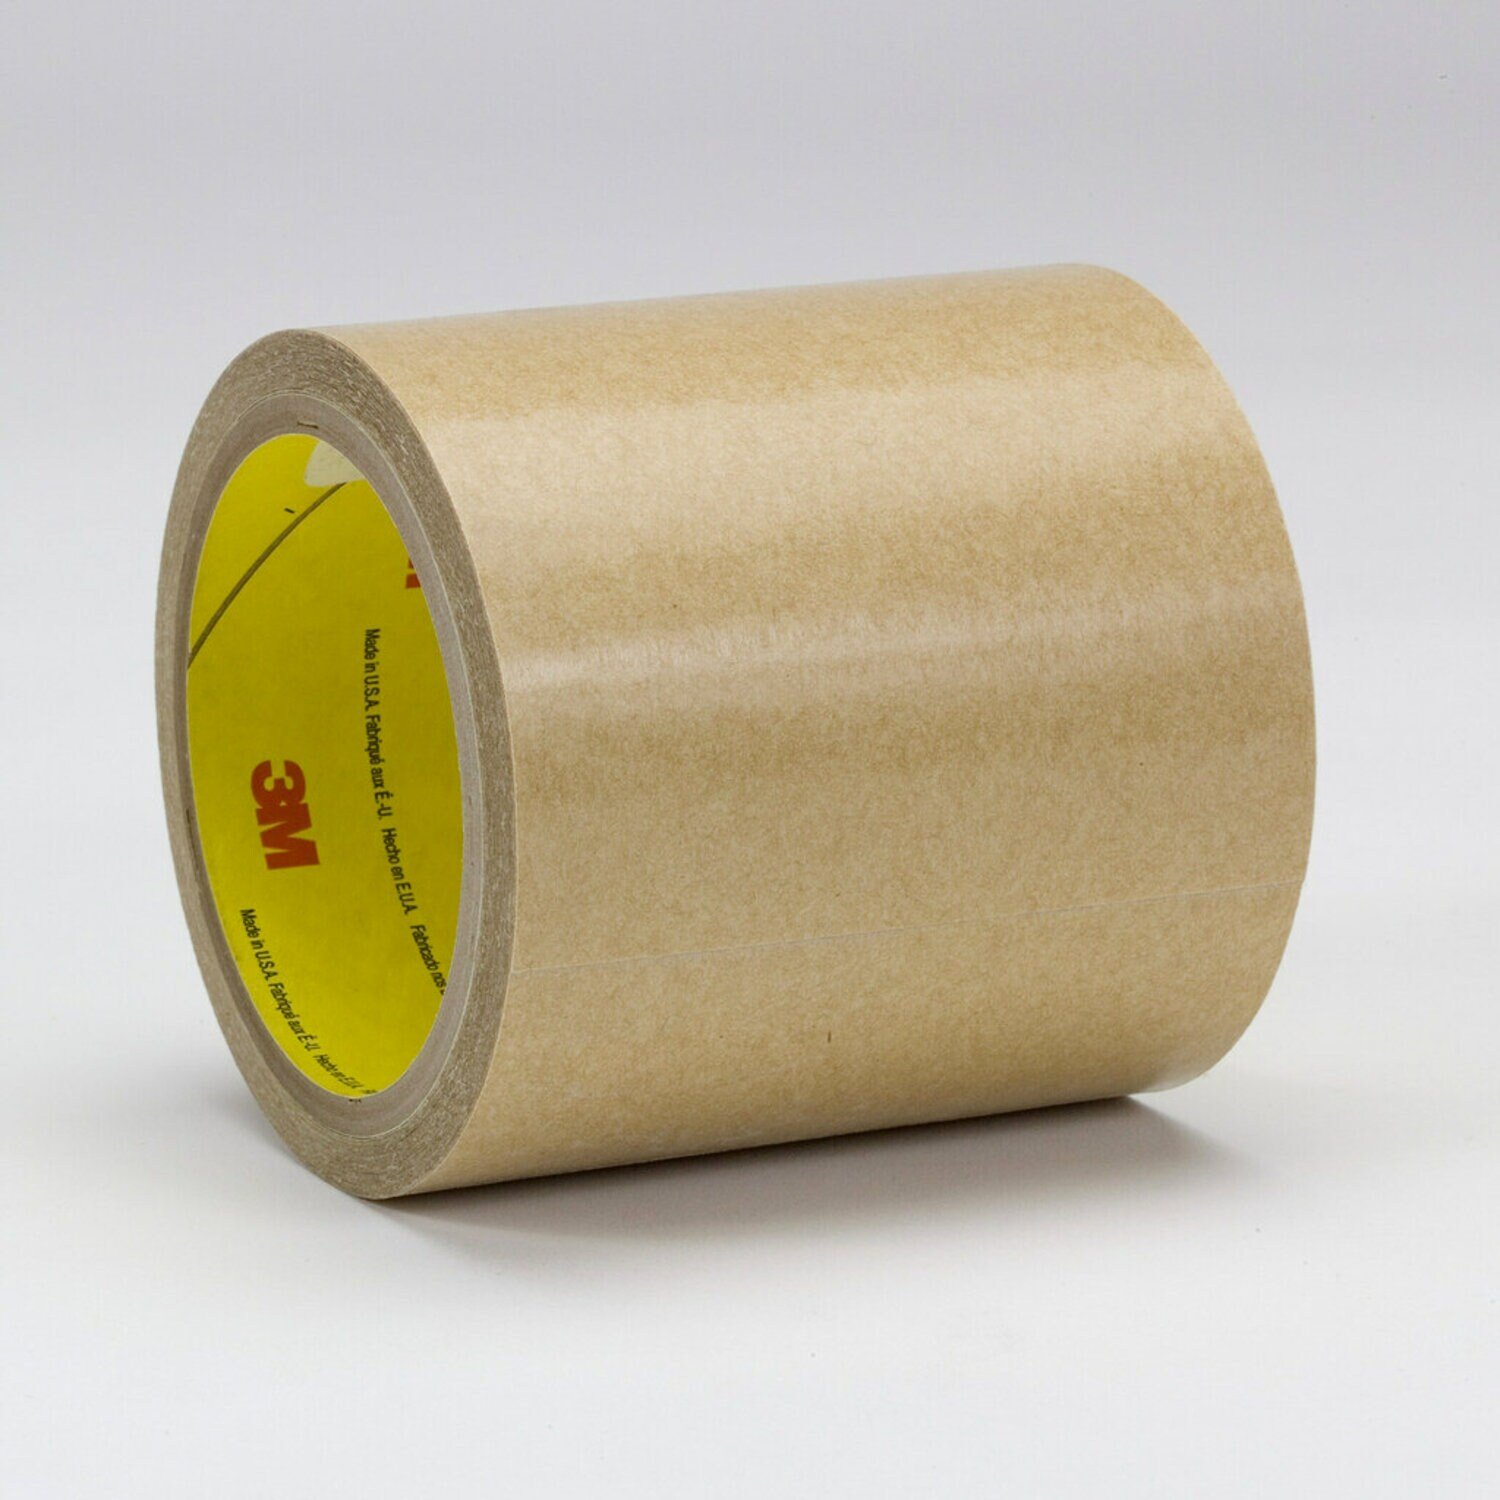 7010295172 - 3M Adhesive Transfer Tape 9671, Clear, 1 in x 60 yd, 2 mil, 36 rolls
per case